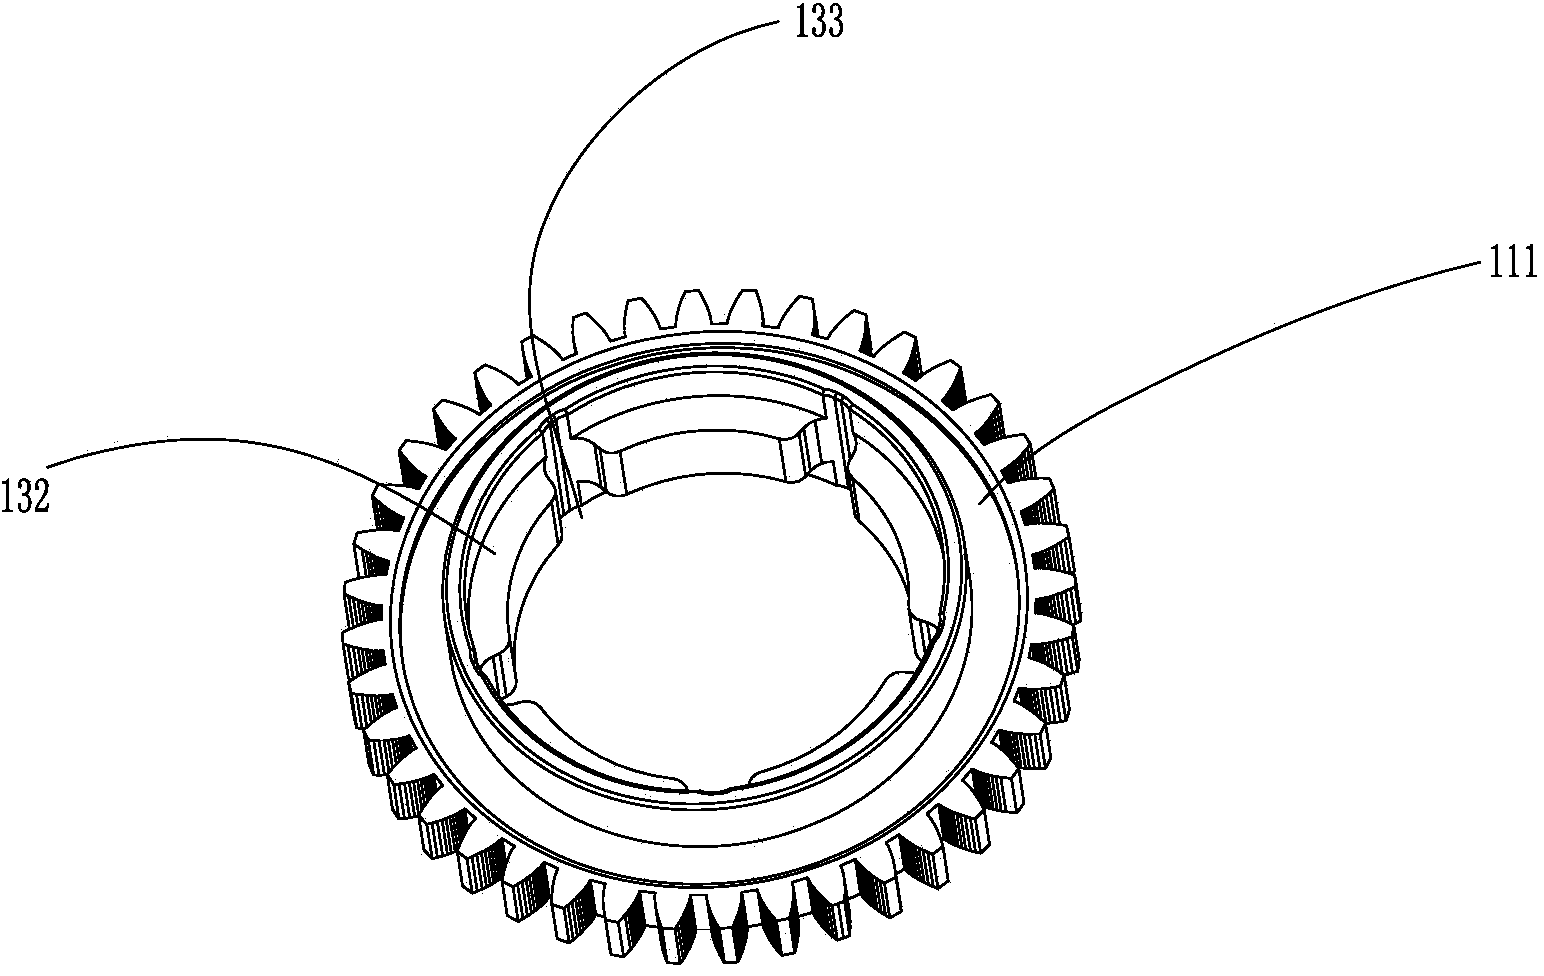 Coping and replacing device of electrode cap